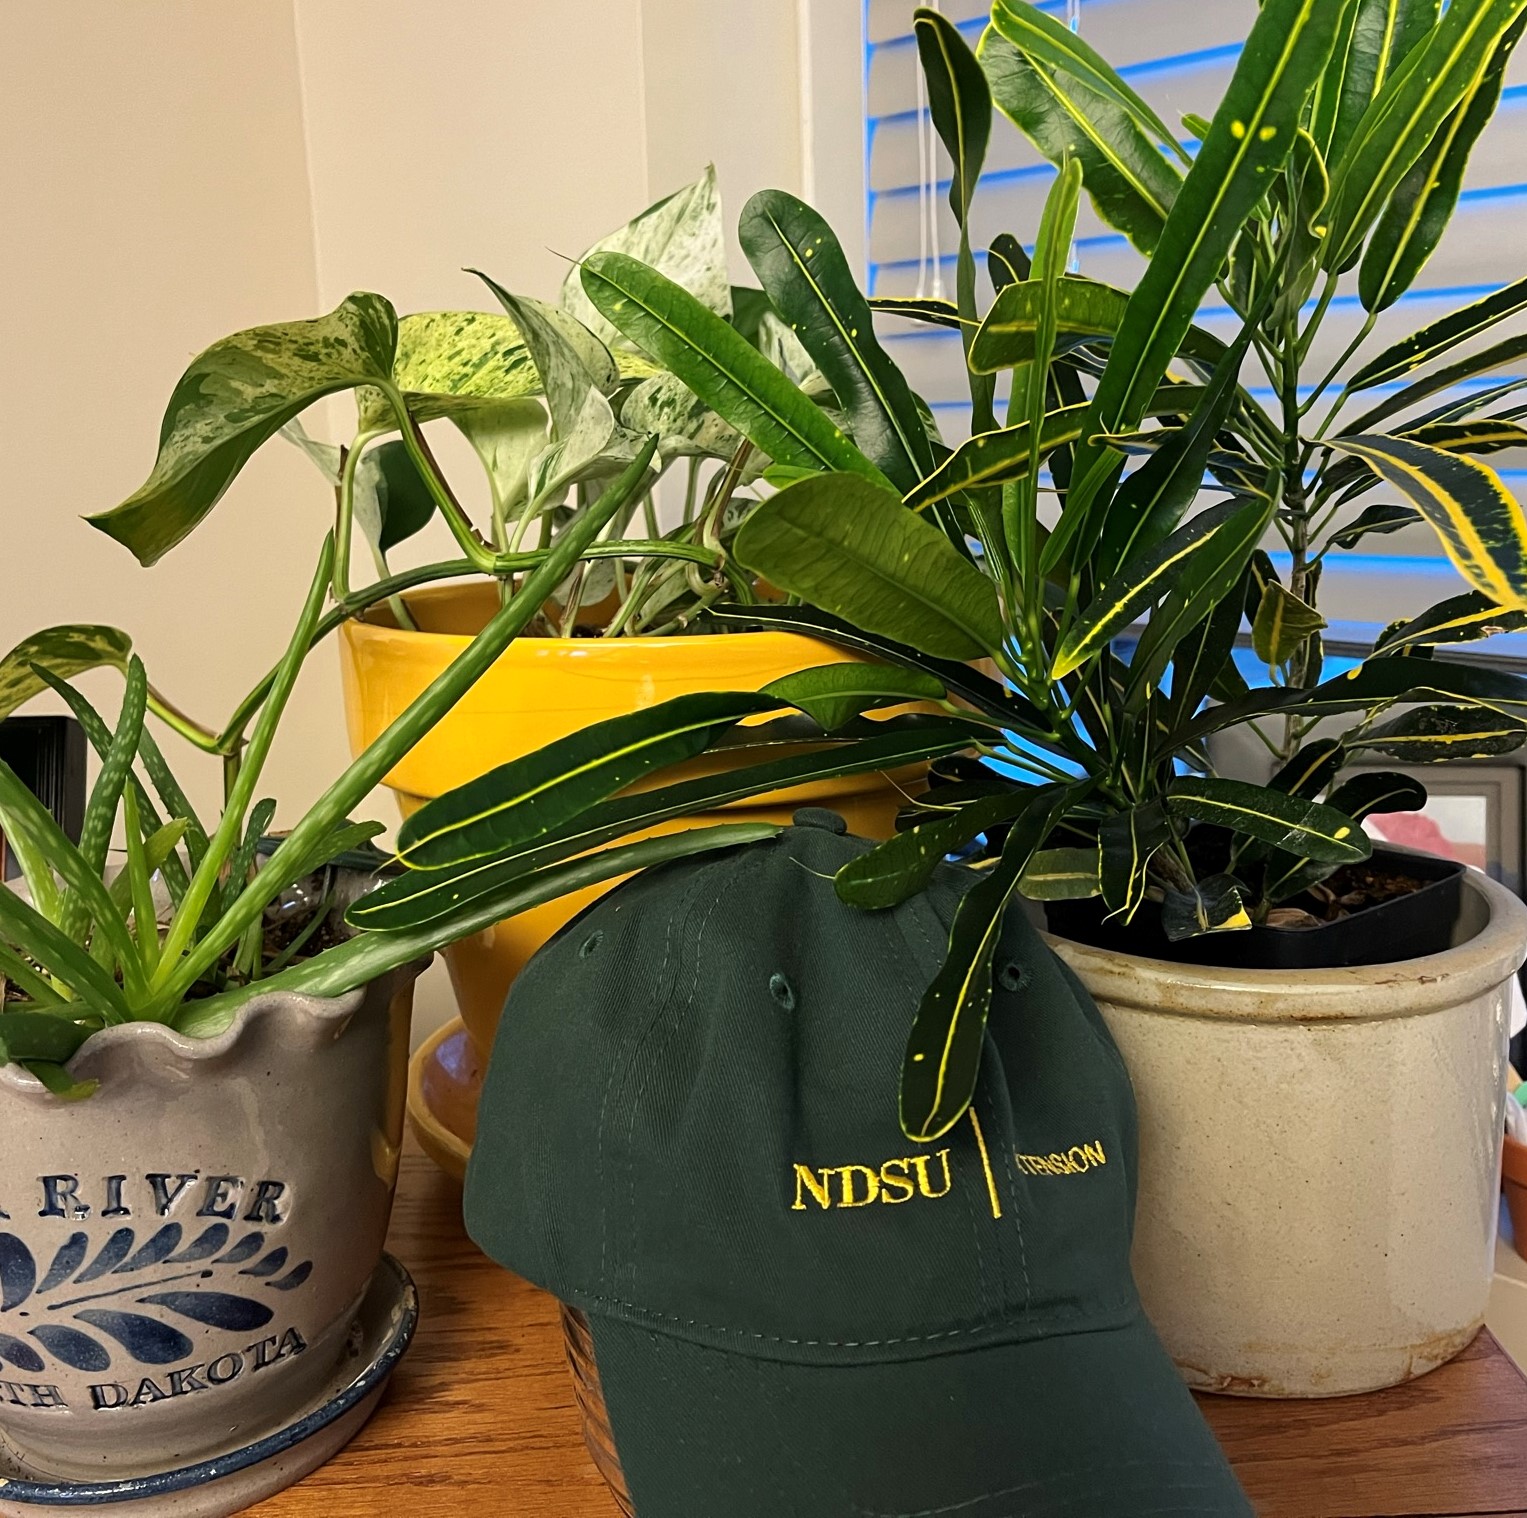 According to the National Initiative for Consumer Horticulture, having indoor plants at work boosts creativity and productivity, and increases job satisfaction. (NDSU photo)